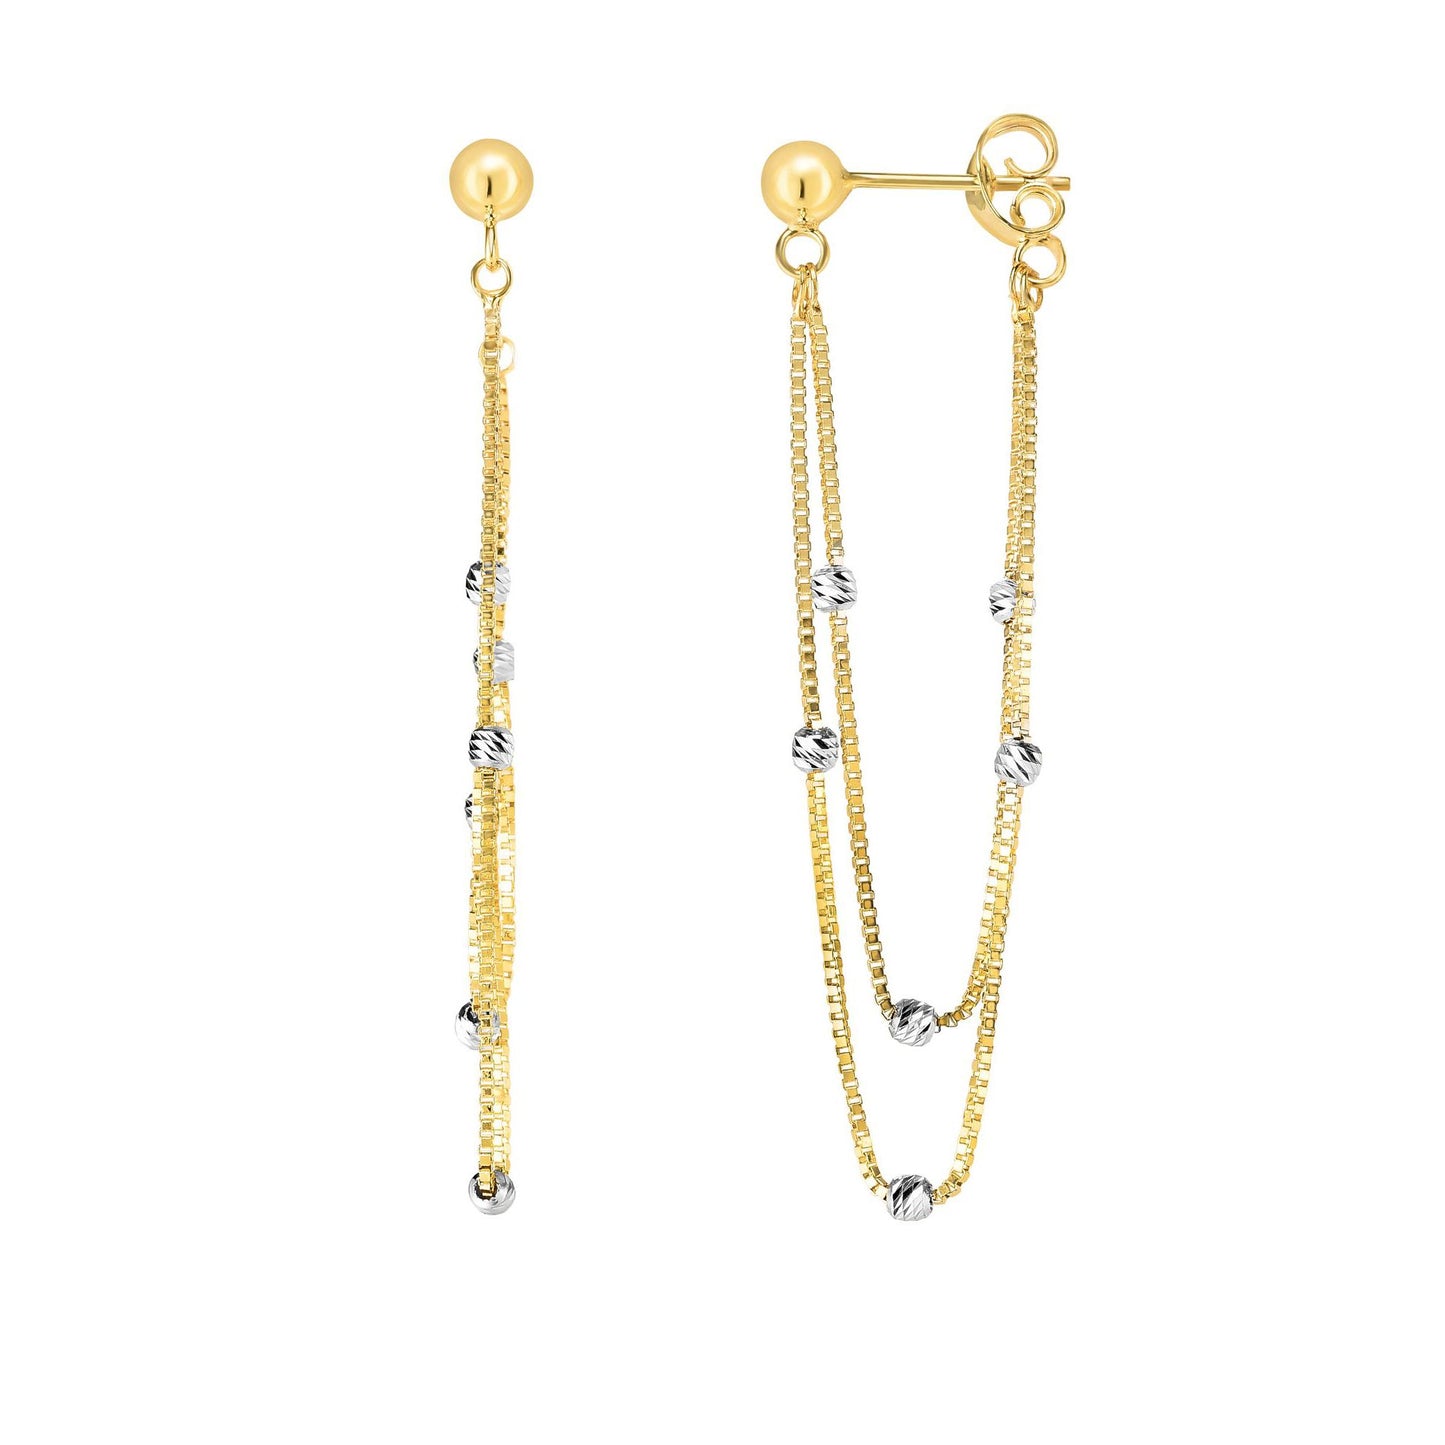 14K White and Yellow Gold Chain & Bead Station Front to Back Drop Earring